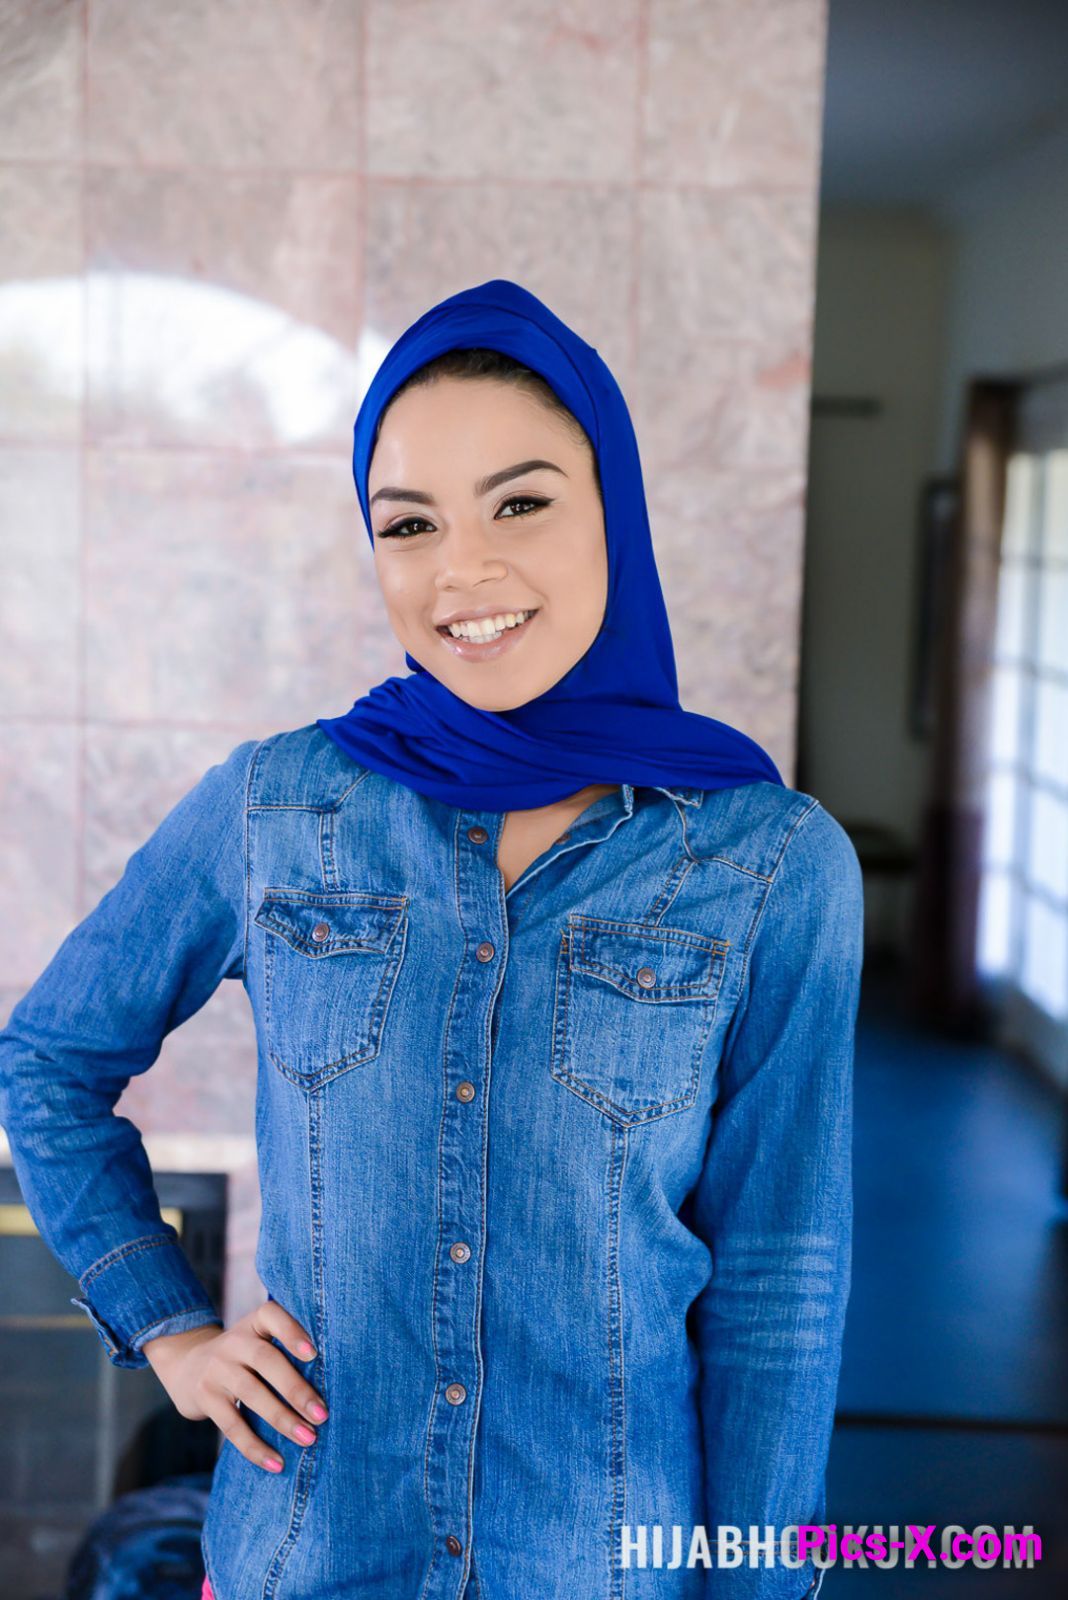 Moving Day Deal - Hijab Hookup - Image 1